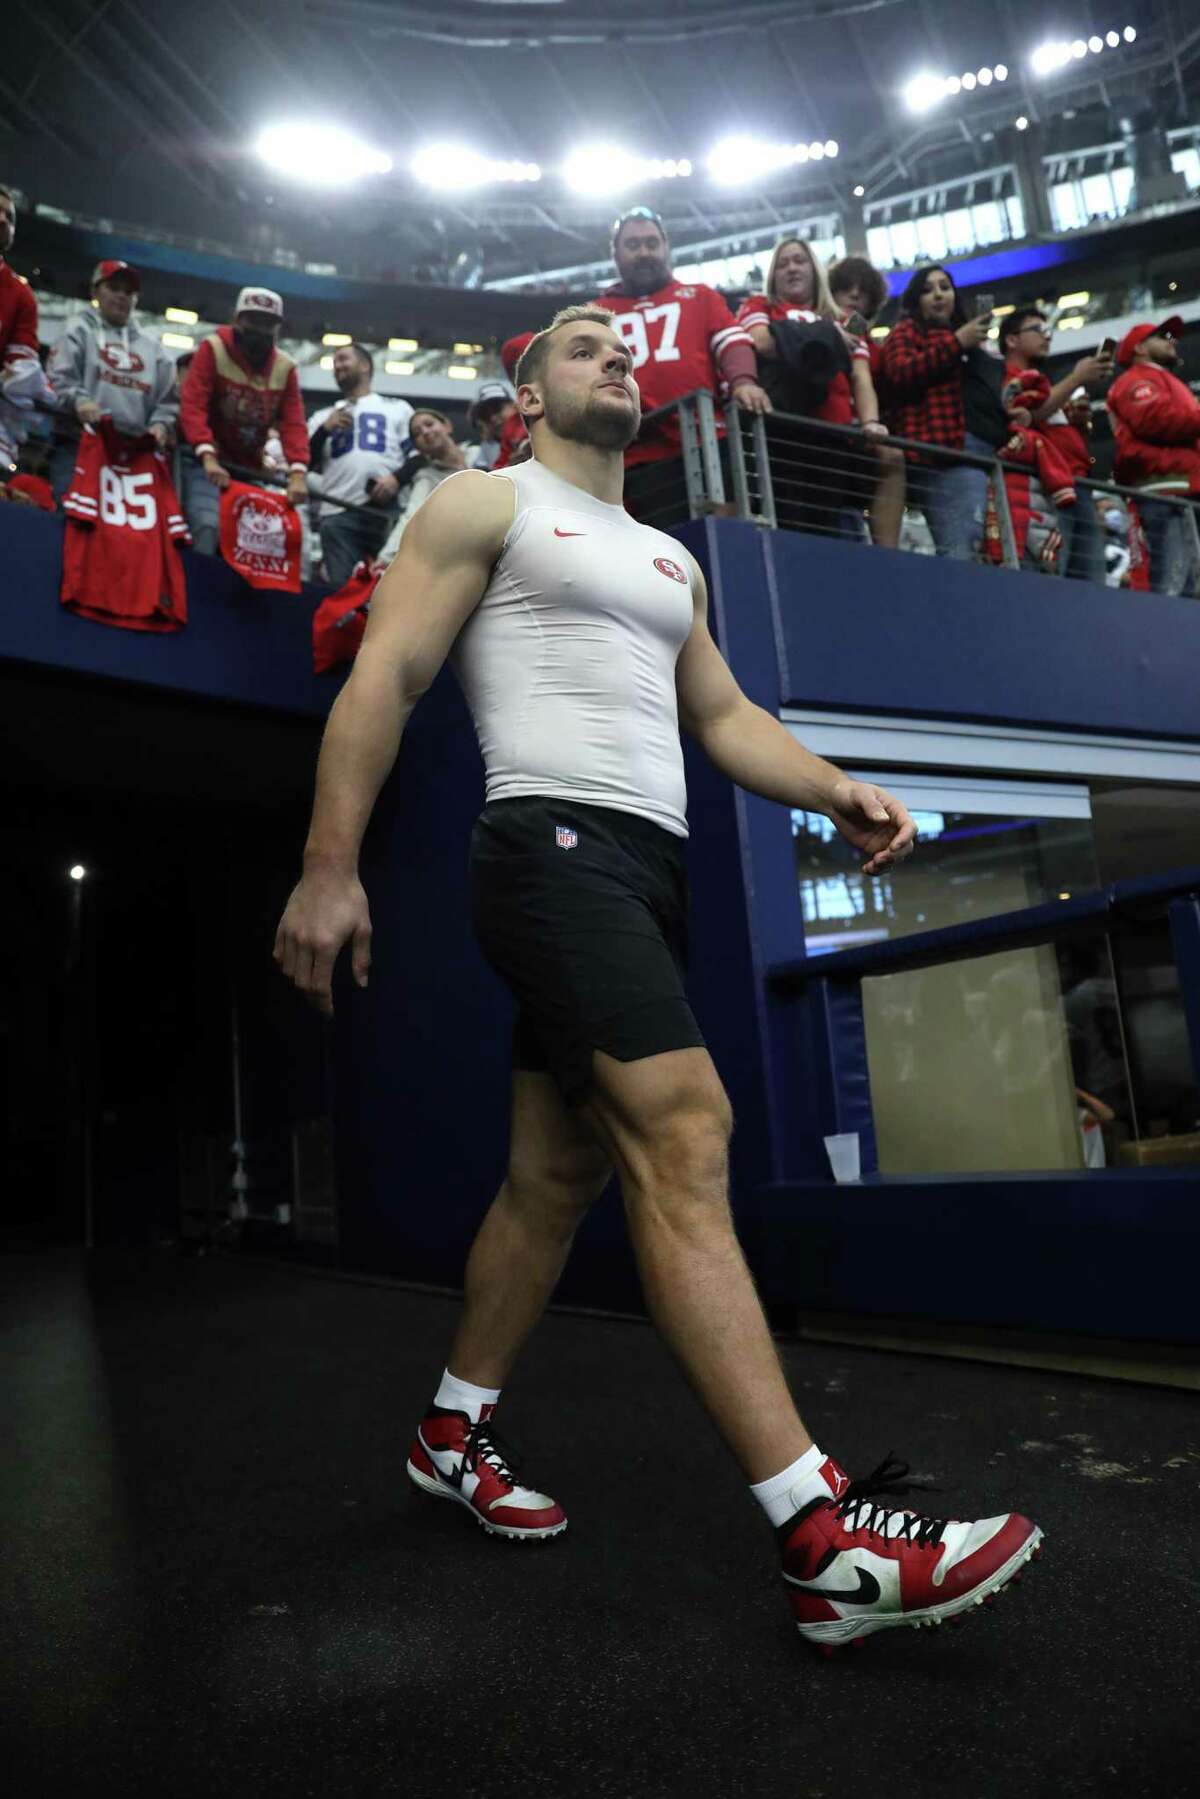 San Francisco 49ers' Nick Bosa walks onto the field before Niners play Dallas Cowboys in NFL NFC Wild Card Playoff game at AT&T Stadium in Arlington, Texas on Sunday, January 16, 2022.